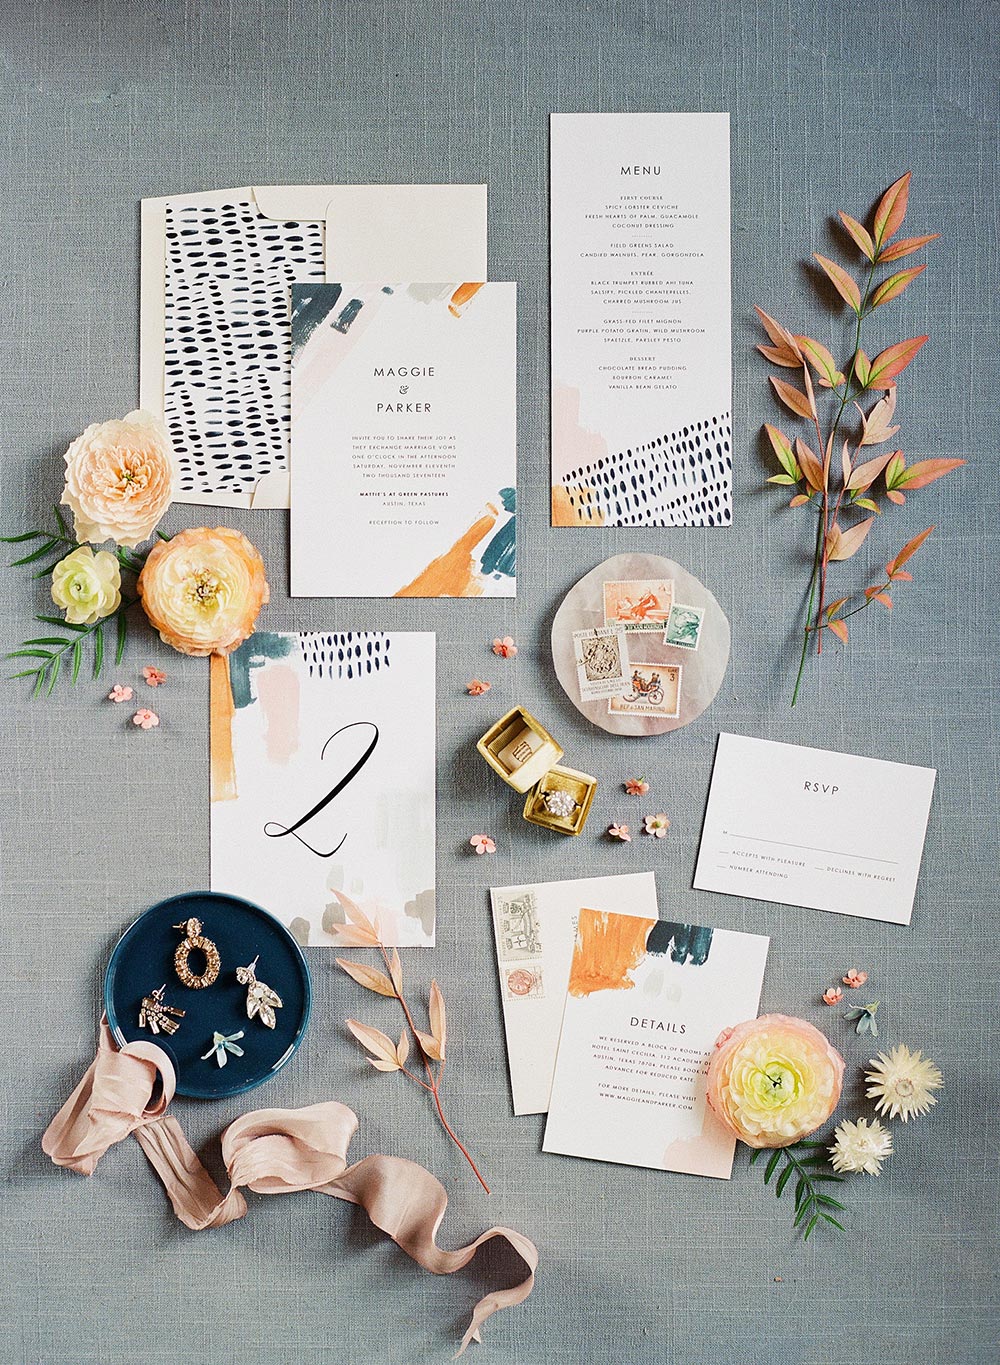 get in loser, we're going shopping! This styled shoot concept is